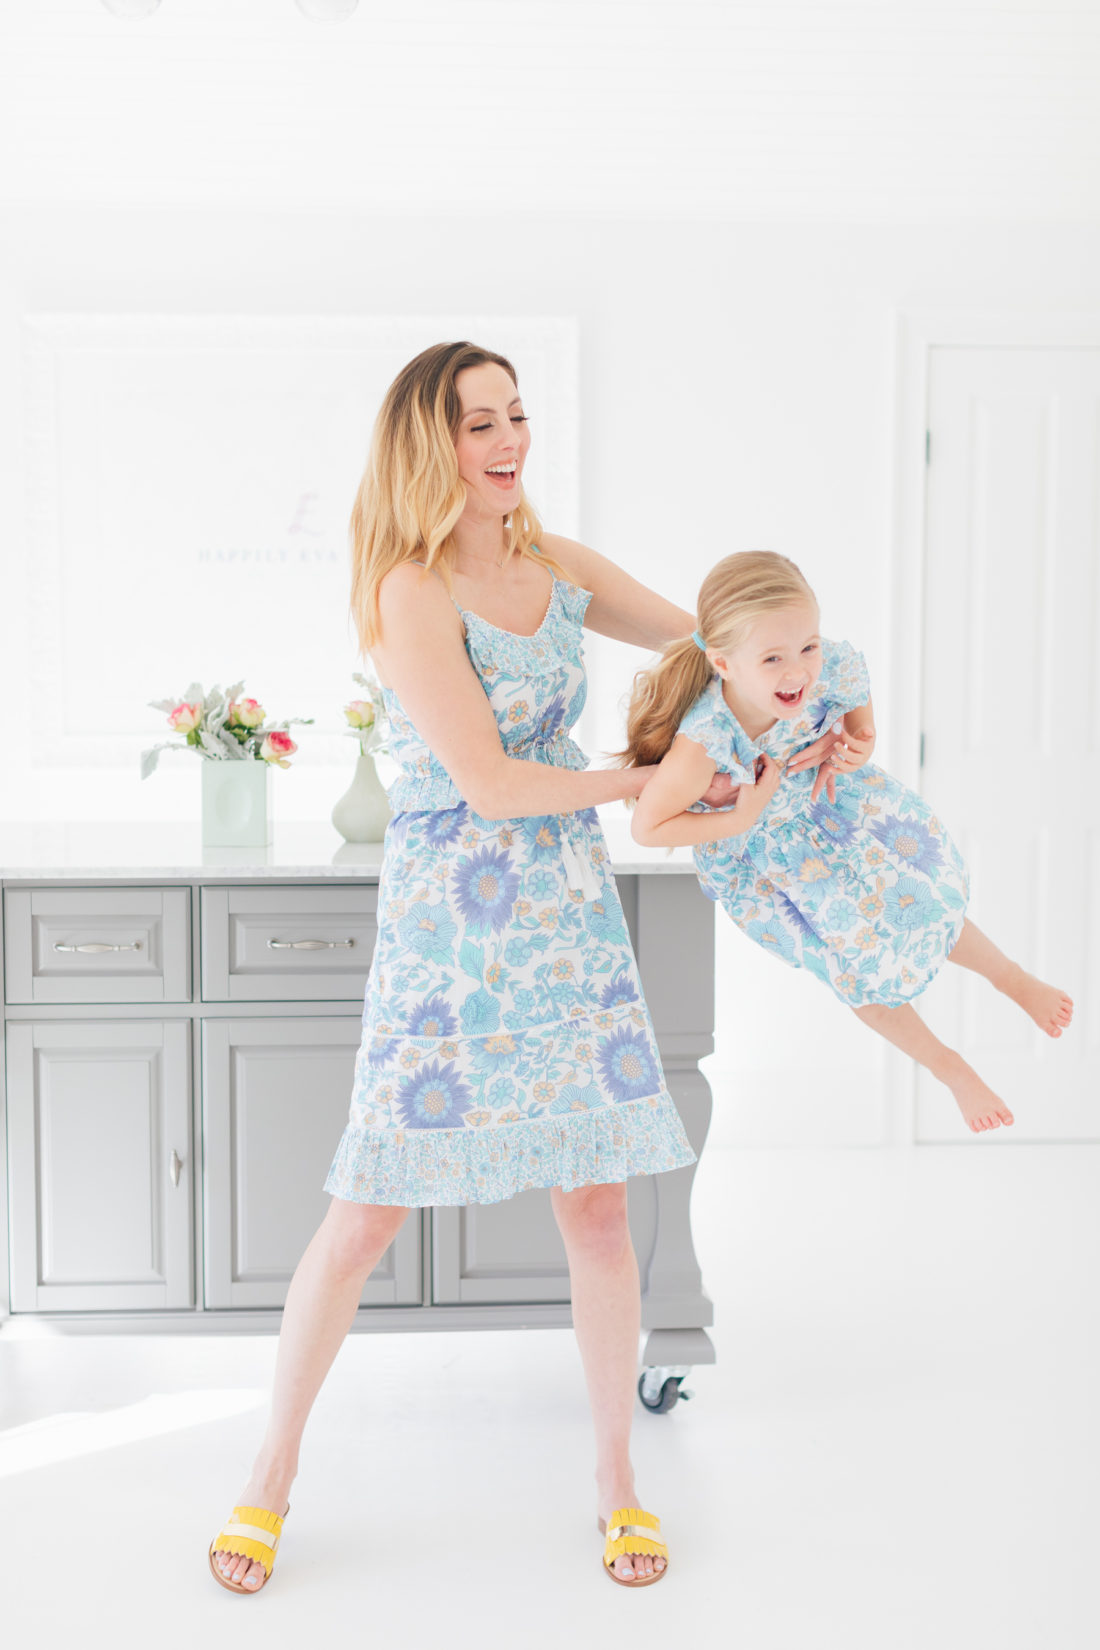 Eva Amurri Martino swings daughter Marlowe in her arms while wearing matching floral printed dresses from the Happily Eva After x Masala Baby capsule collection